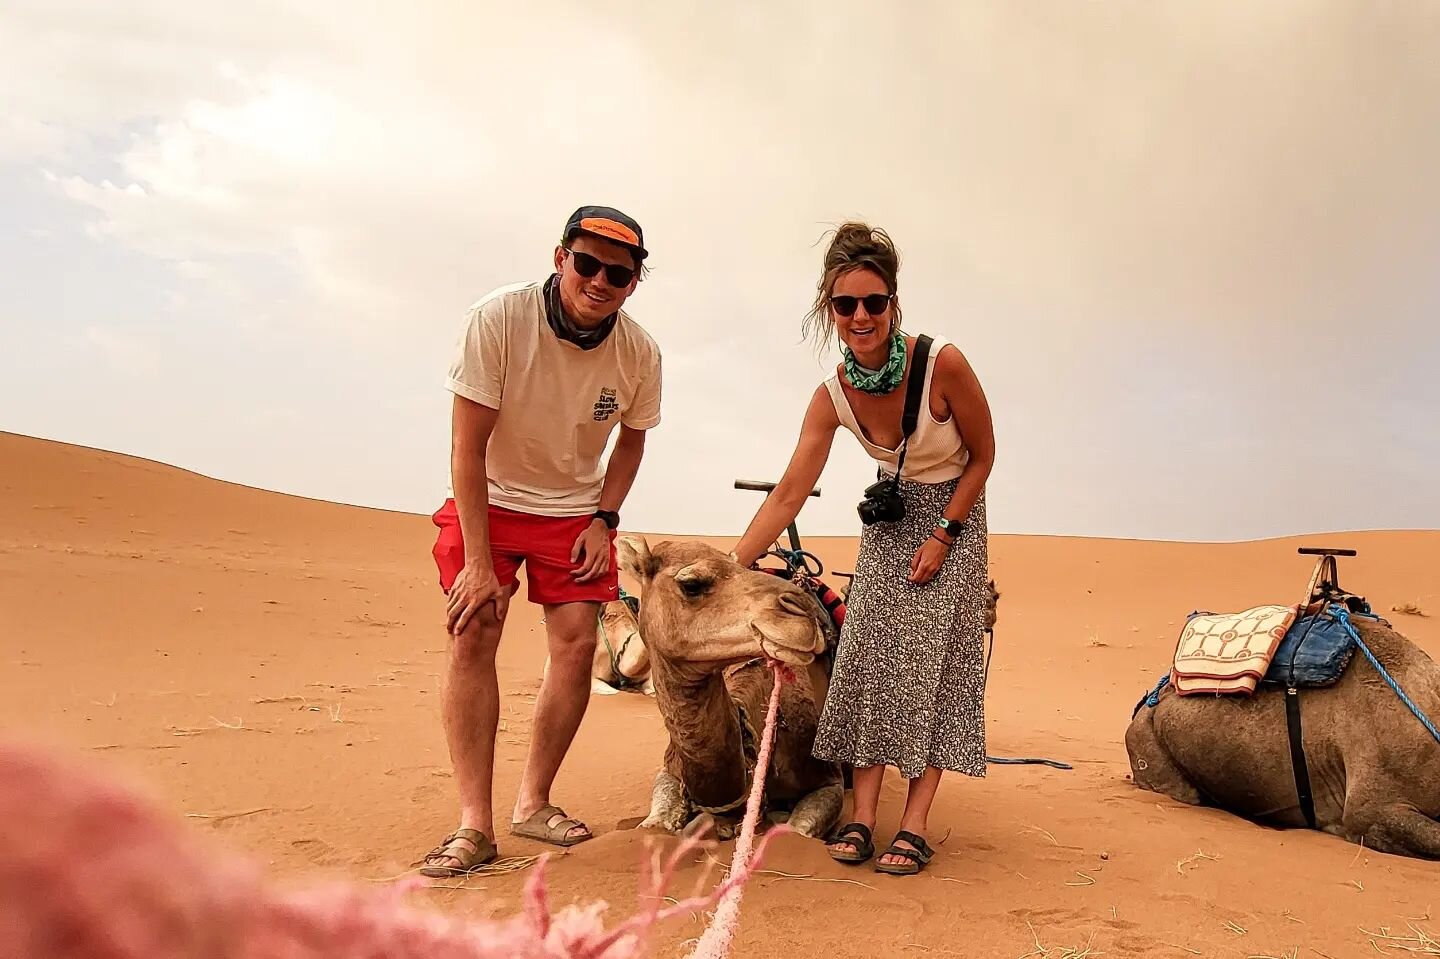 Just came back from the Sahara desert!

We swapped our bicycles for a 4x4 and @lover_of_sahara drove us over 130 kilometers into the sandy dunes in the middle of the desert.

It was not only our first time in the Sahara, but also our first time ridin